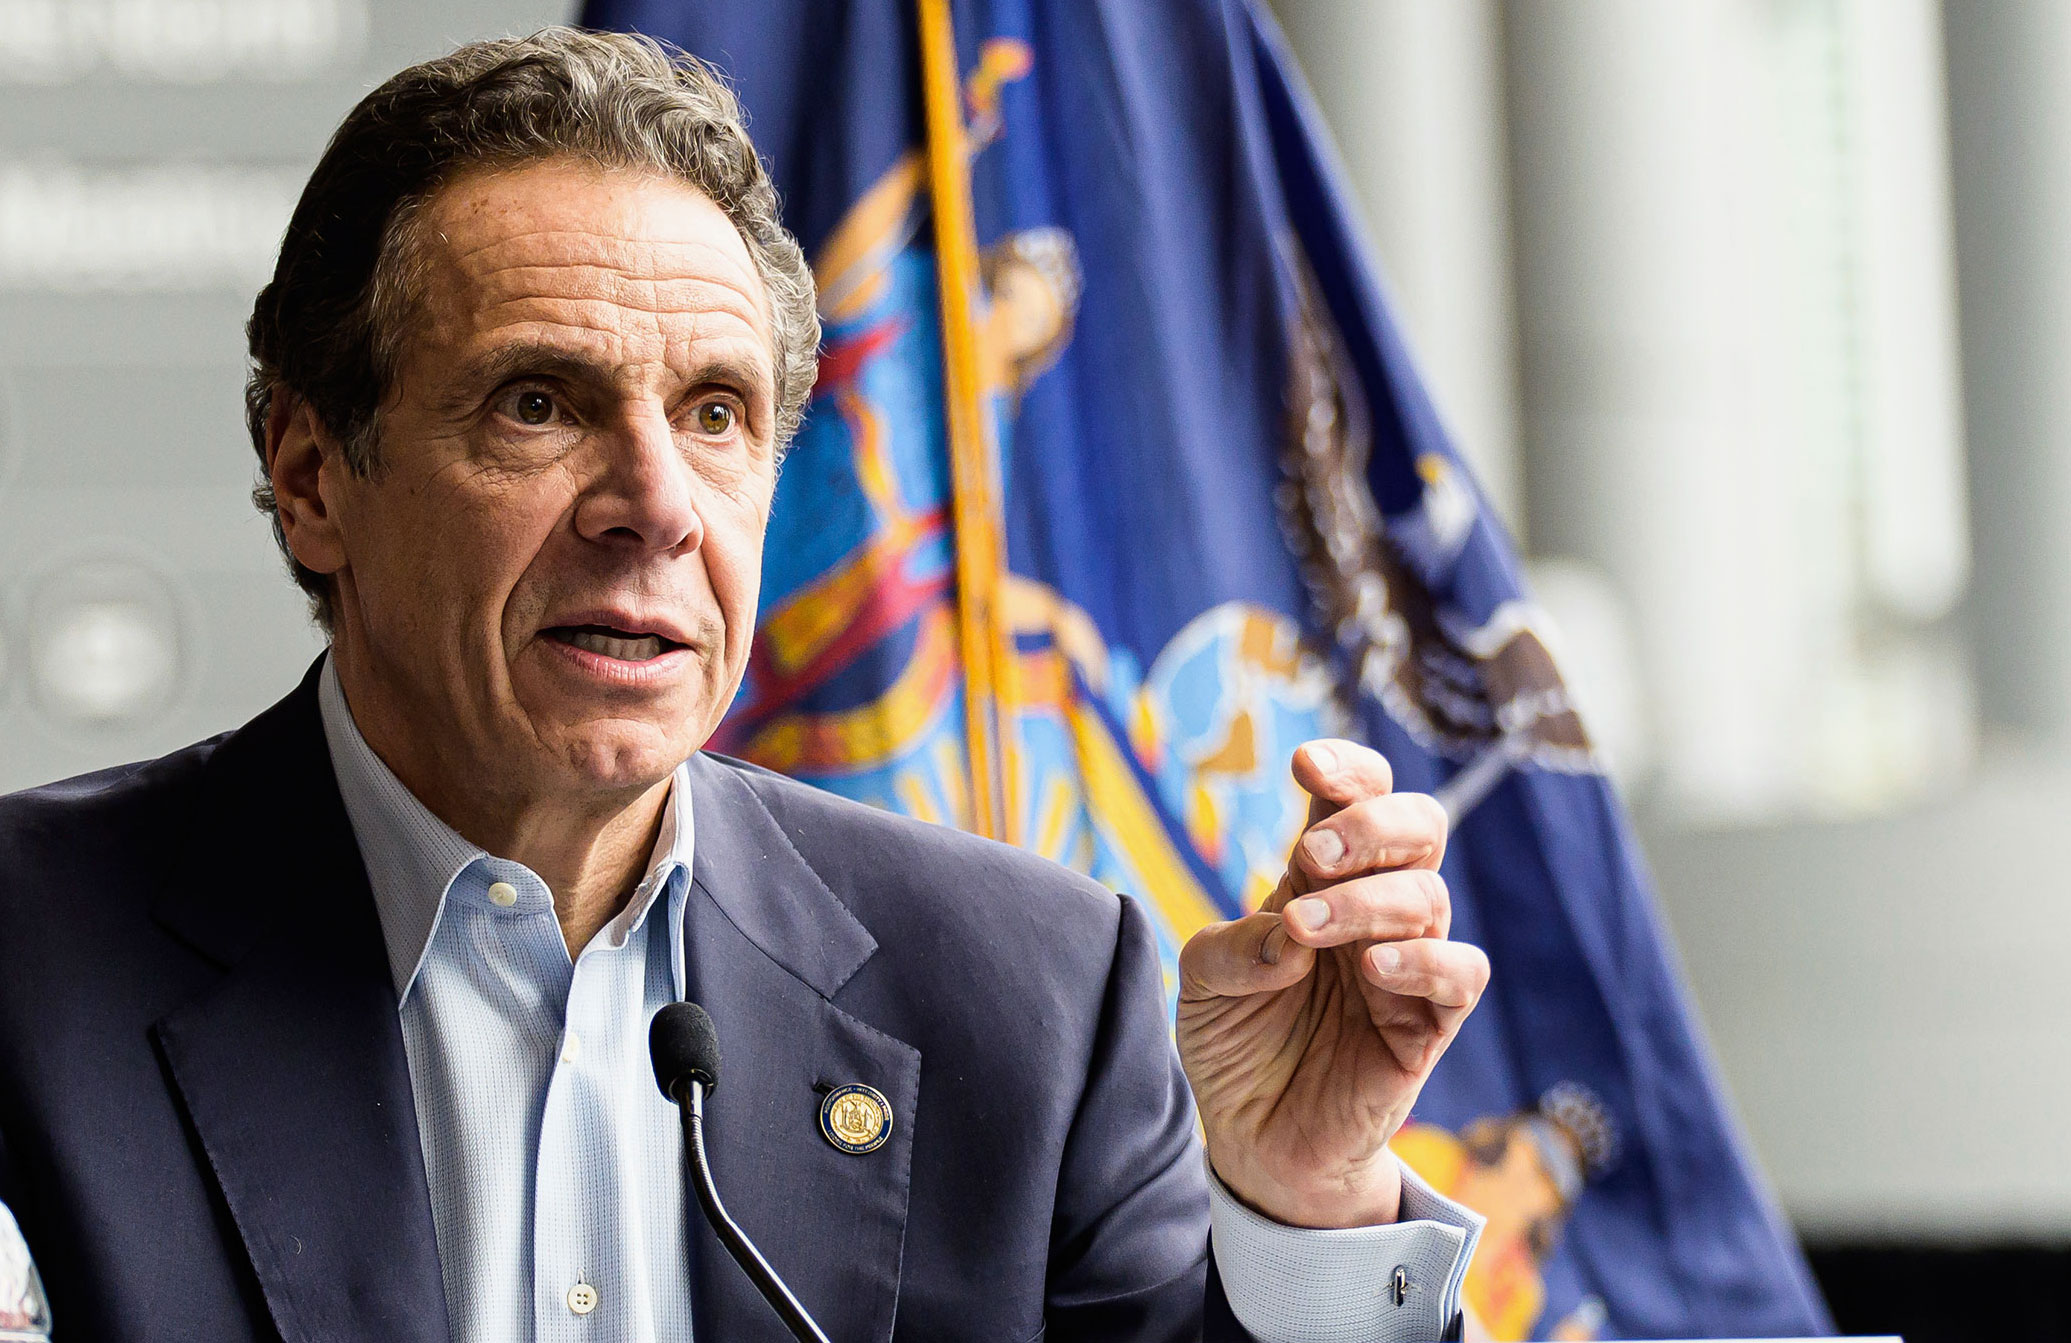 Gov. Andrew Cuomo speaks at a news conference on March 30 at the Javits Center in New York, which is being used as a temporary hospital.